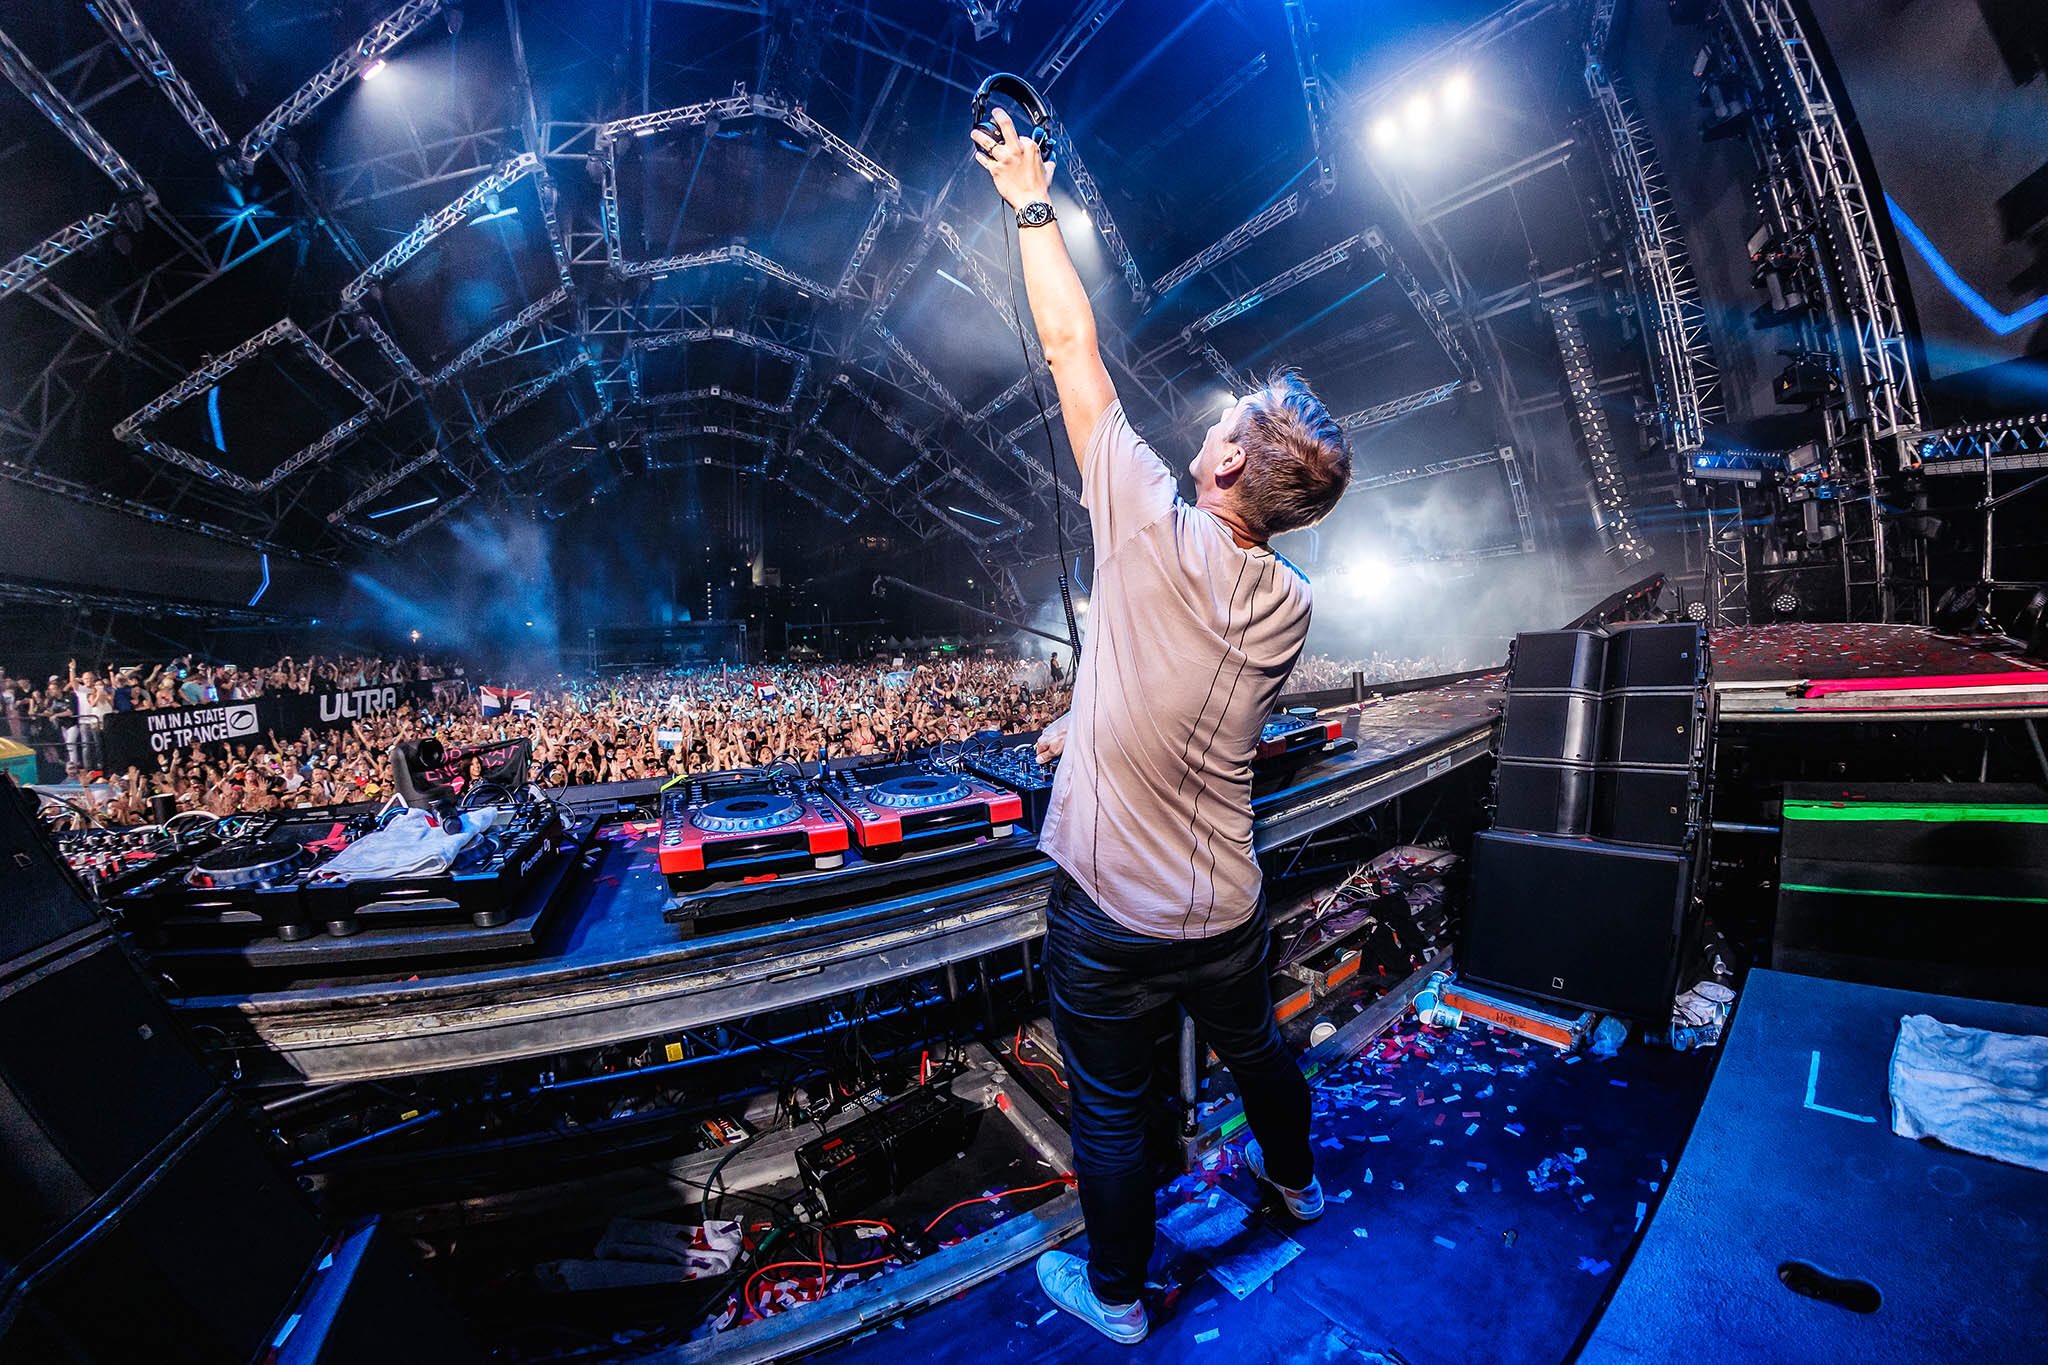 38. A State of Trance. 